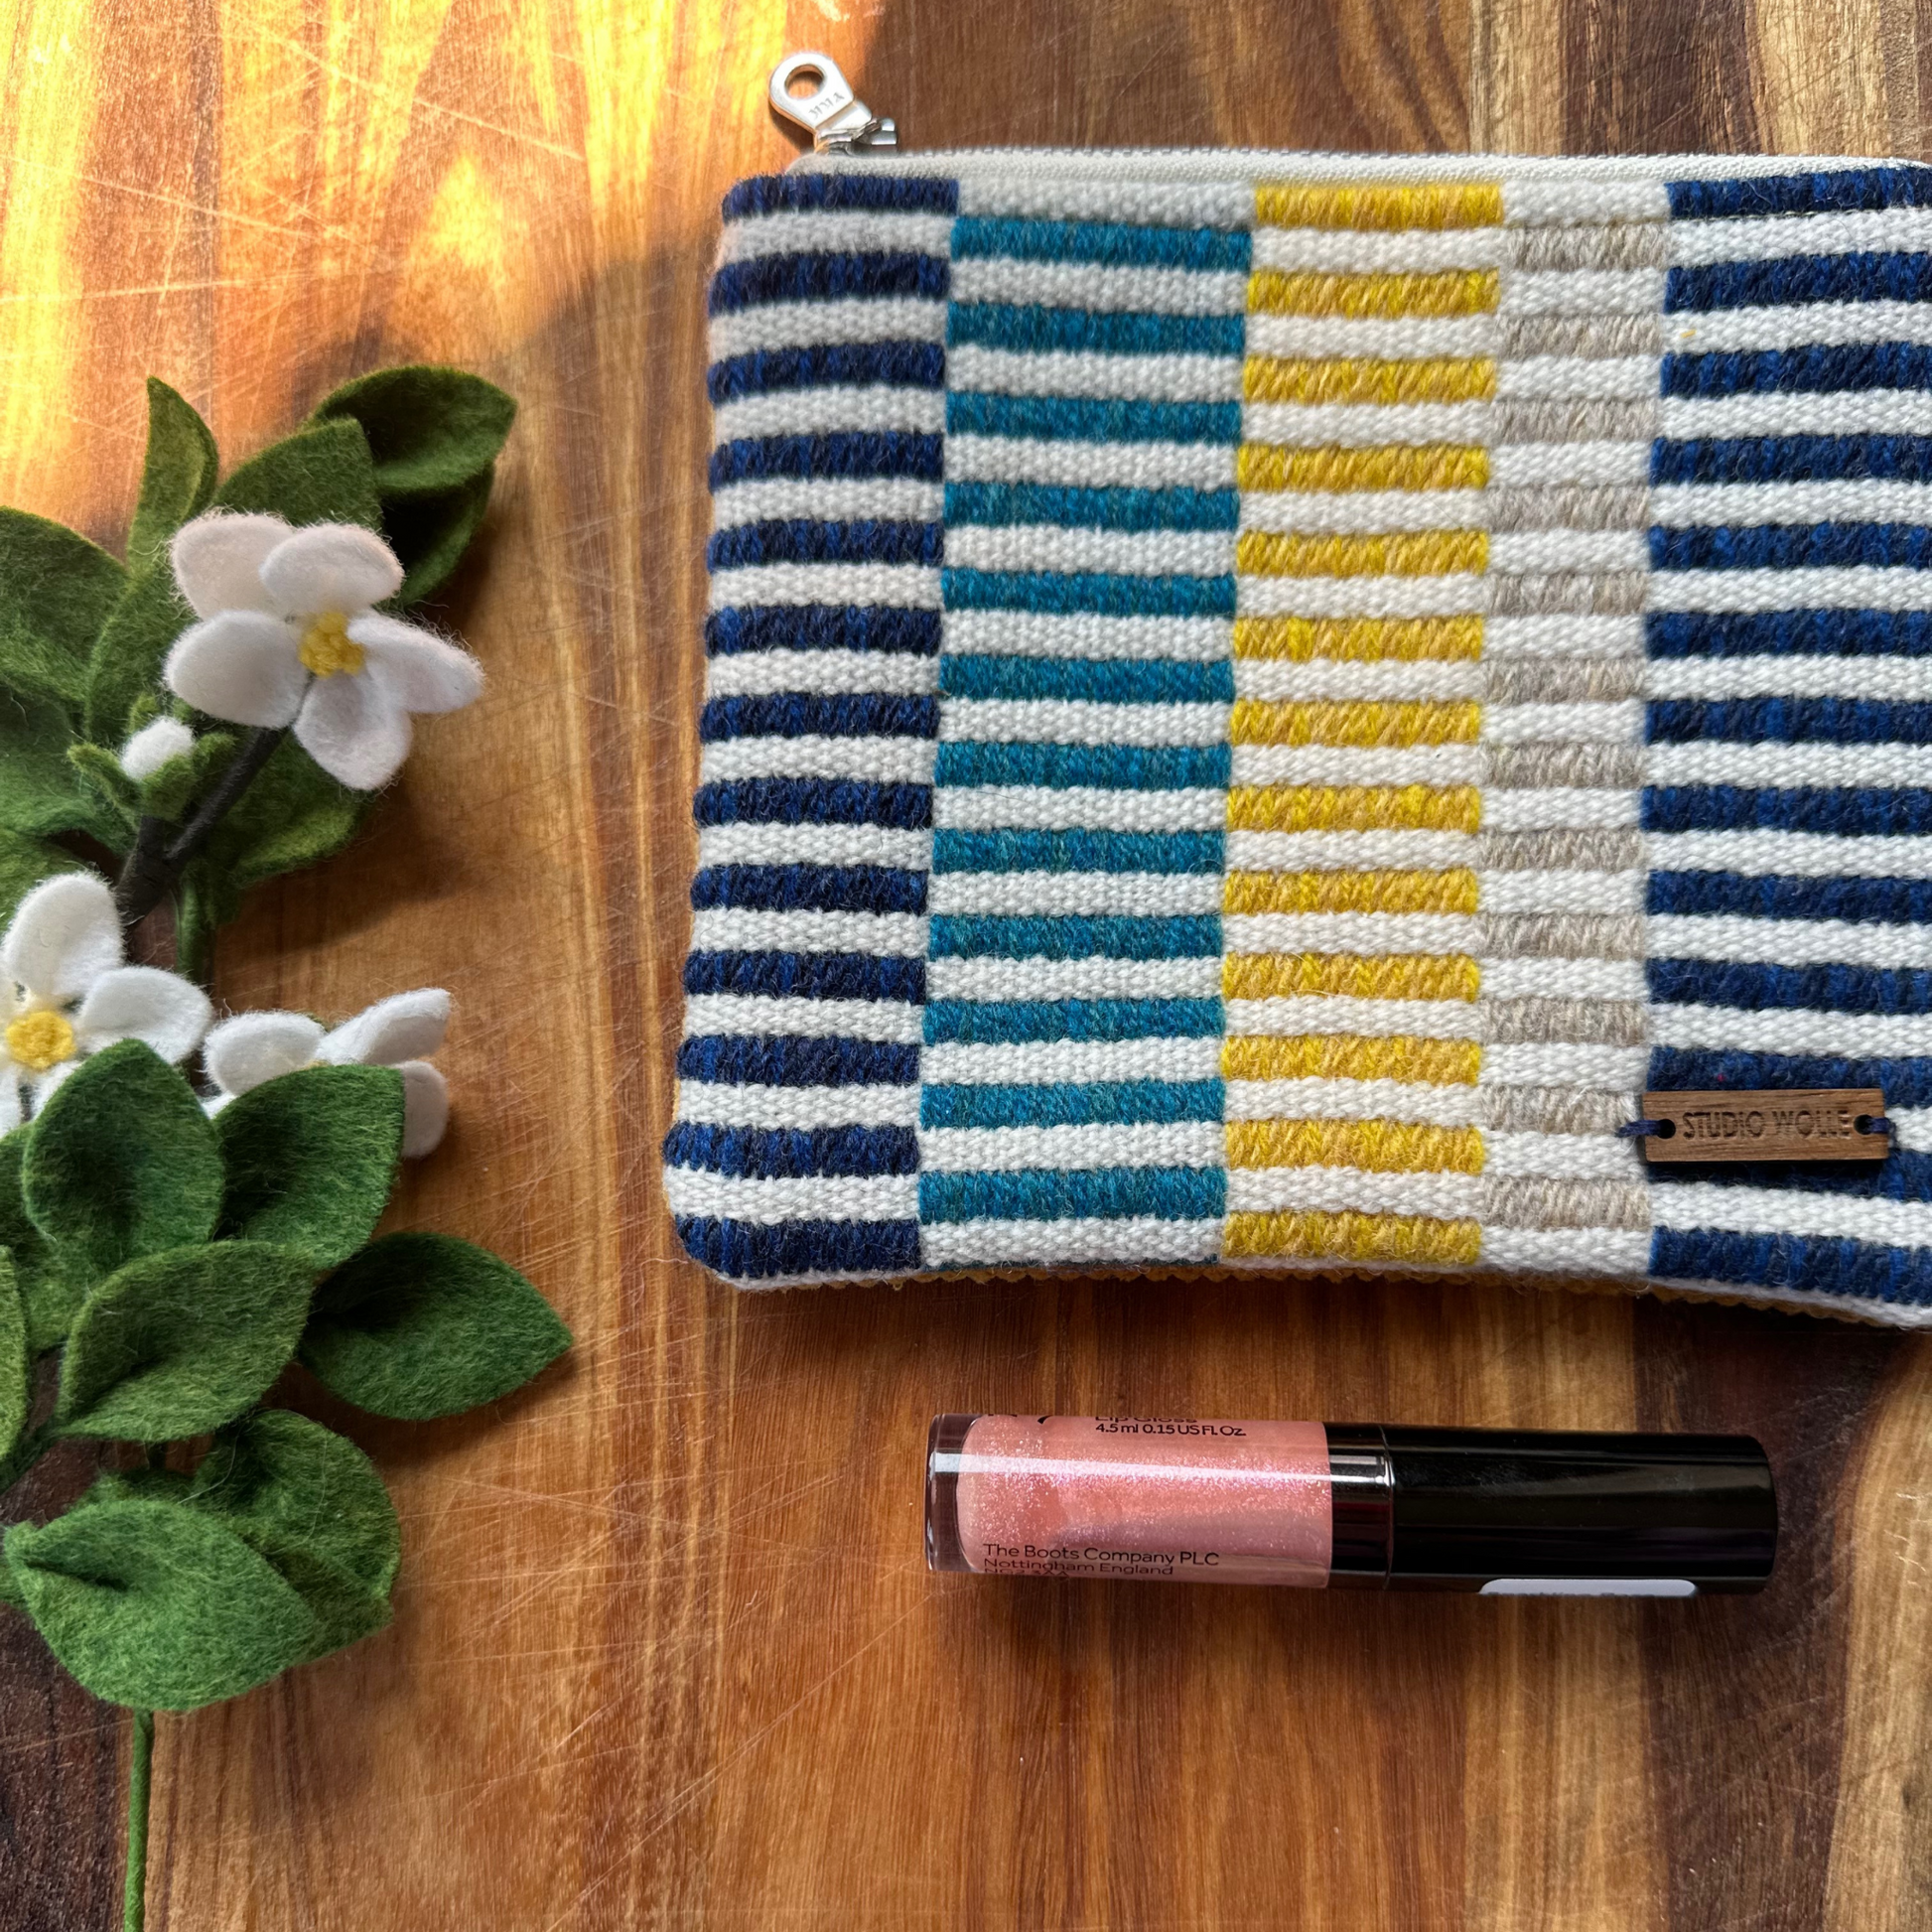 Blue, Turquoise and Yellow Striped Purse with a lipstick for scale